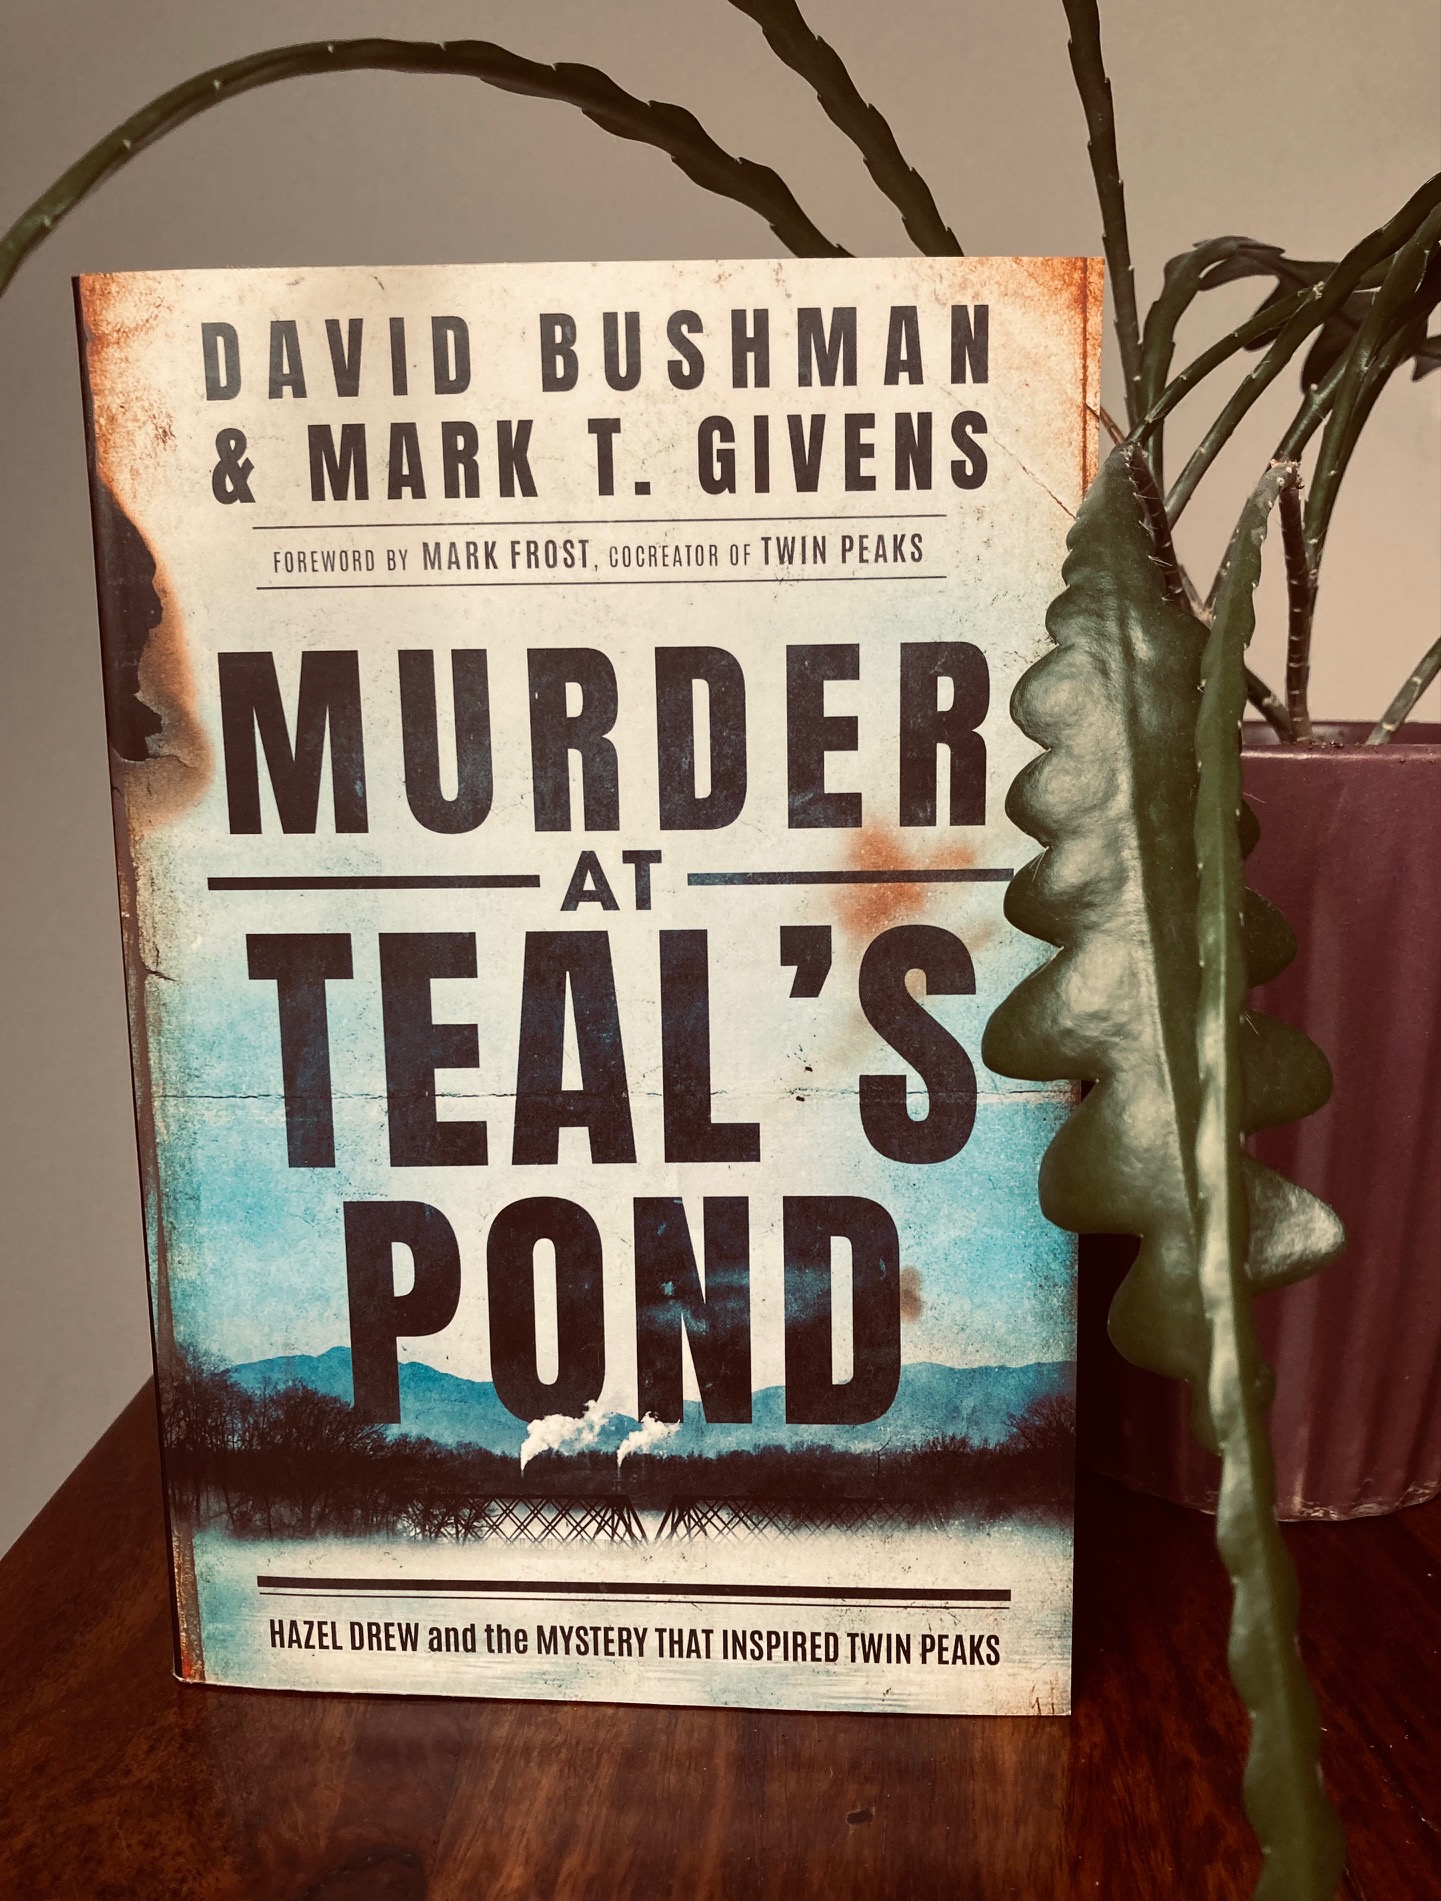 Murder at Teal's Pond by David Bushman and Mark T. Givens book